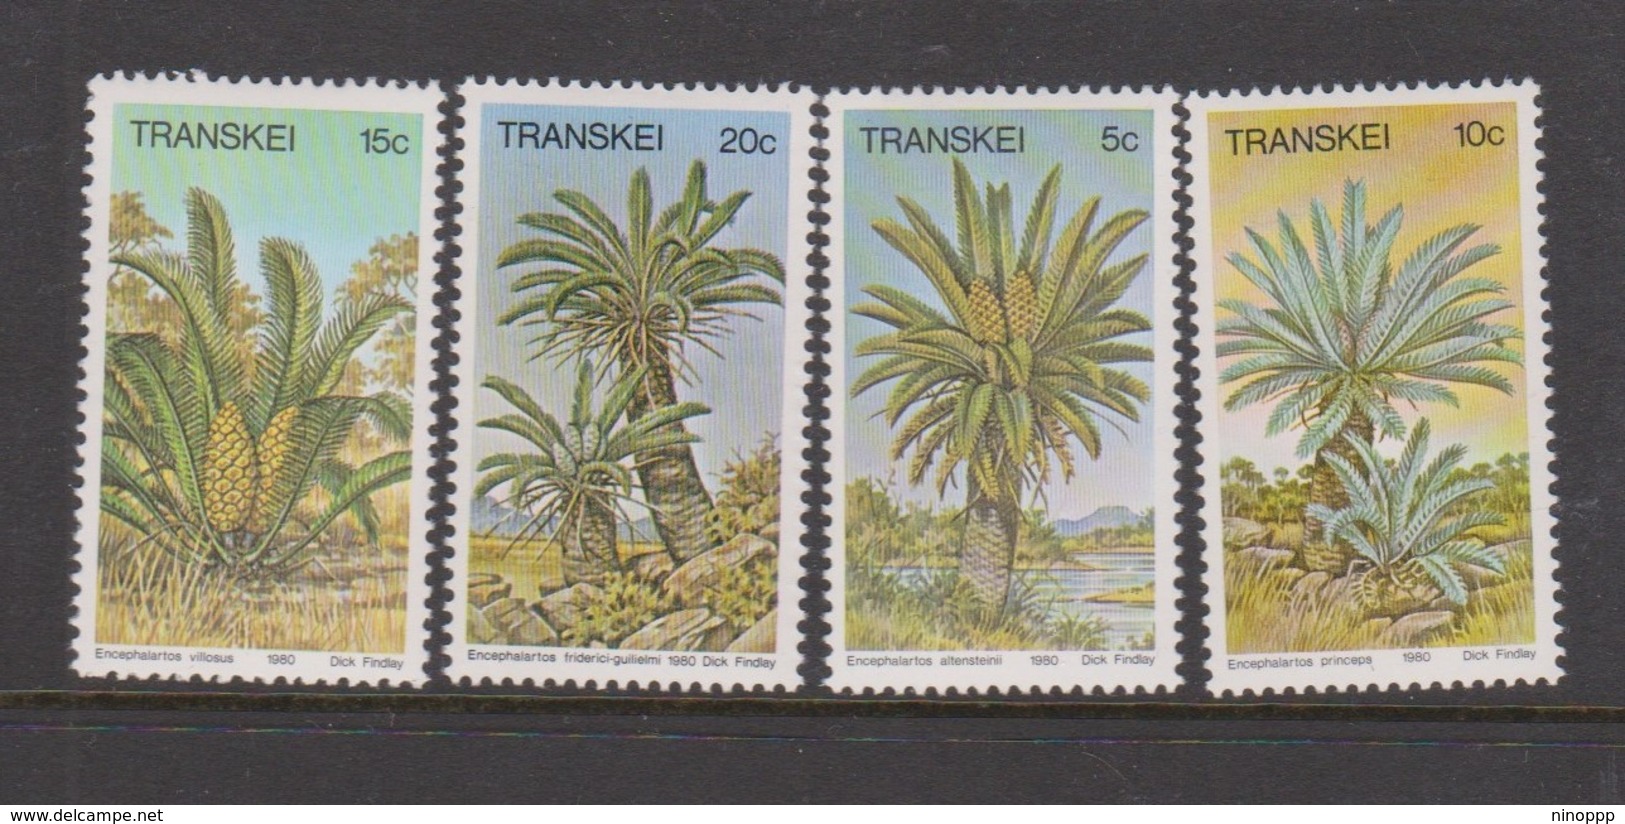 South Africa-Transkei SG 71-74 1980 Cycads, Mint Never Hinged - Transkei